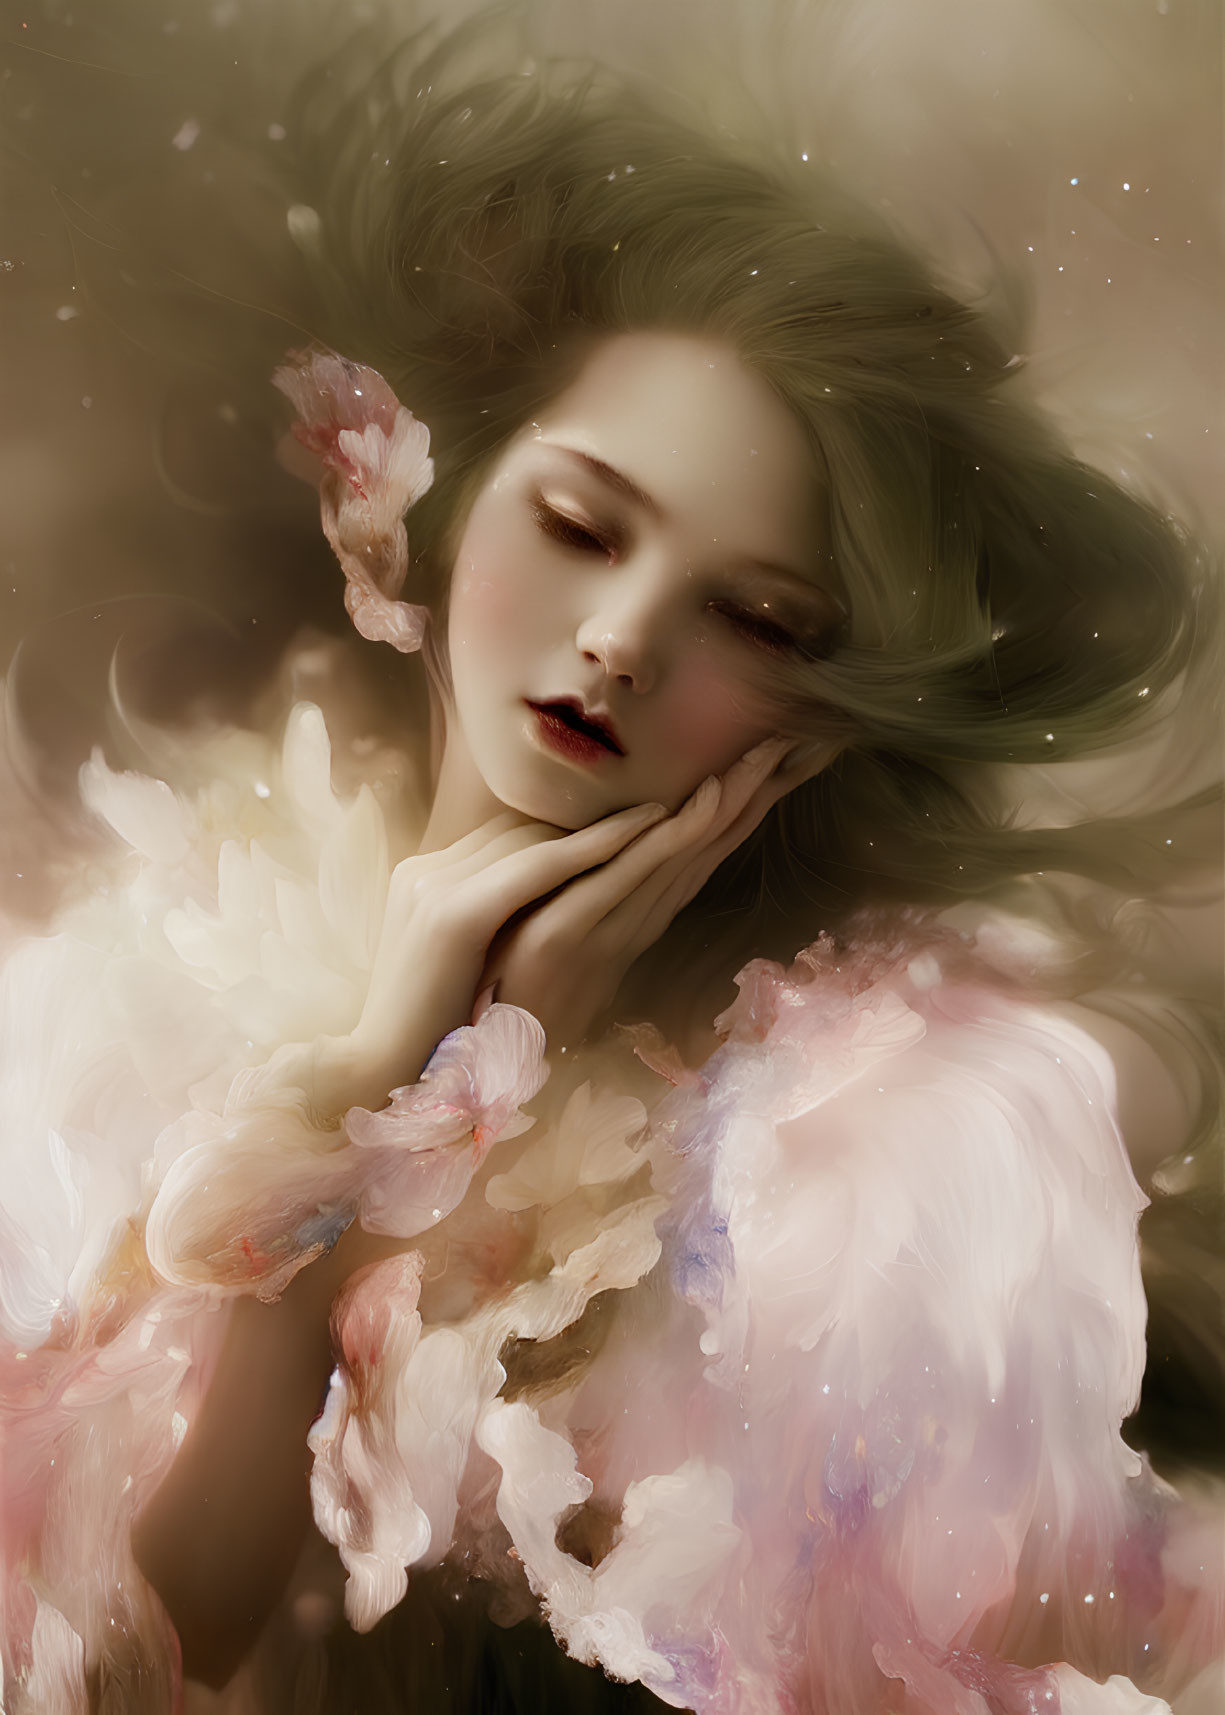 Ethereal portrait of woman with flowing hair and feather-like details